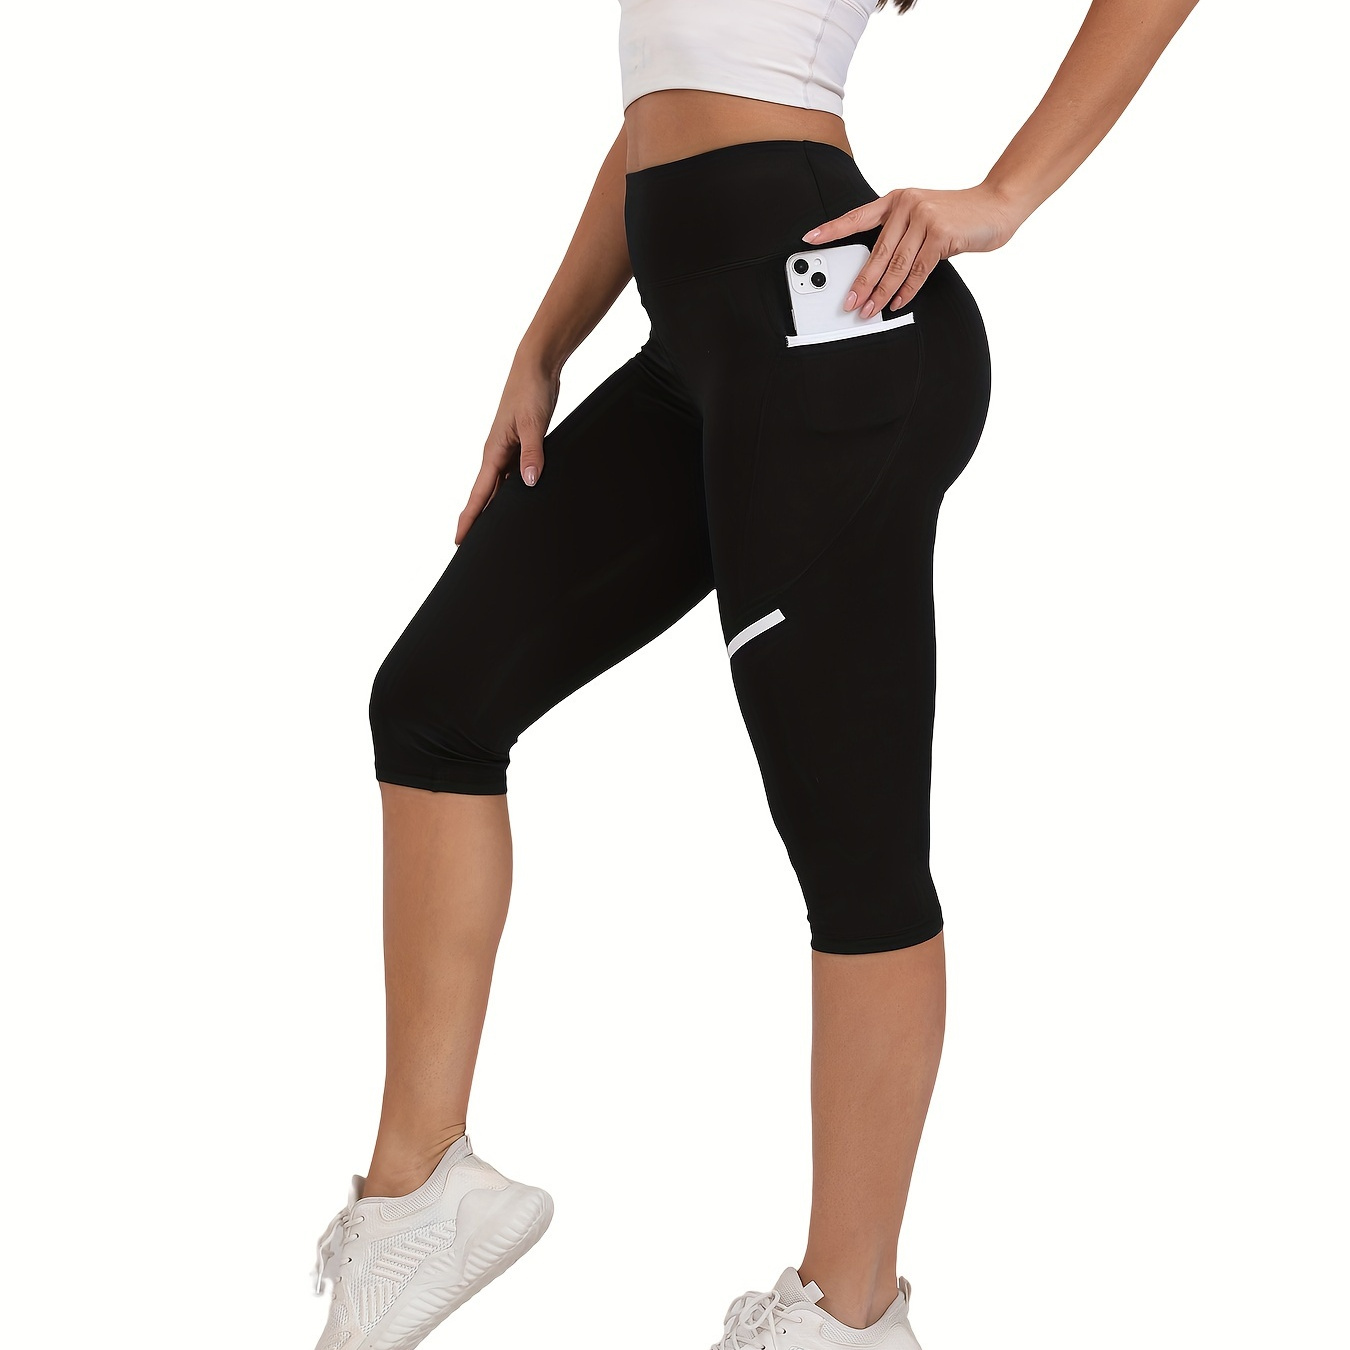 

Women's High Waist Tummy Control Yoga Capris, Breathable Running Fitness Capri Leggings With Strips, Sports Activewear